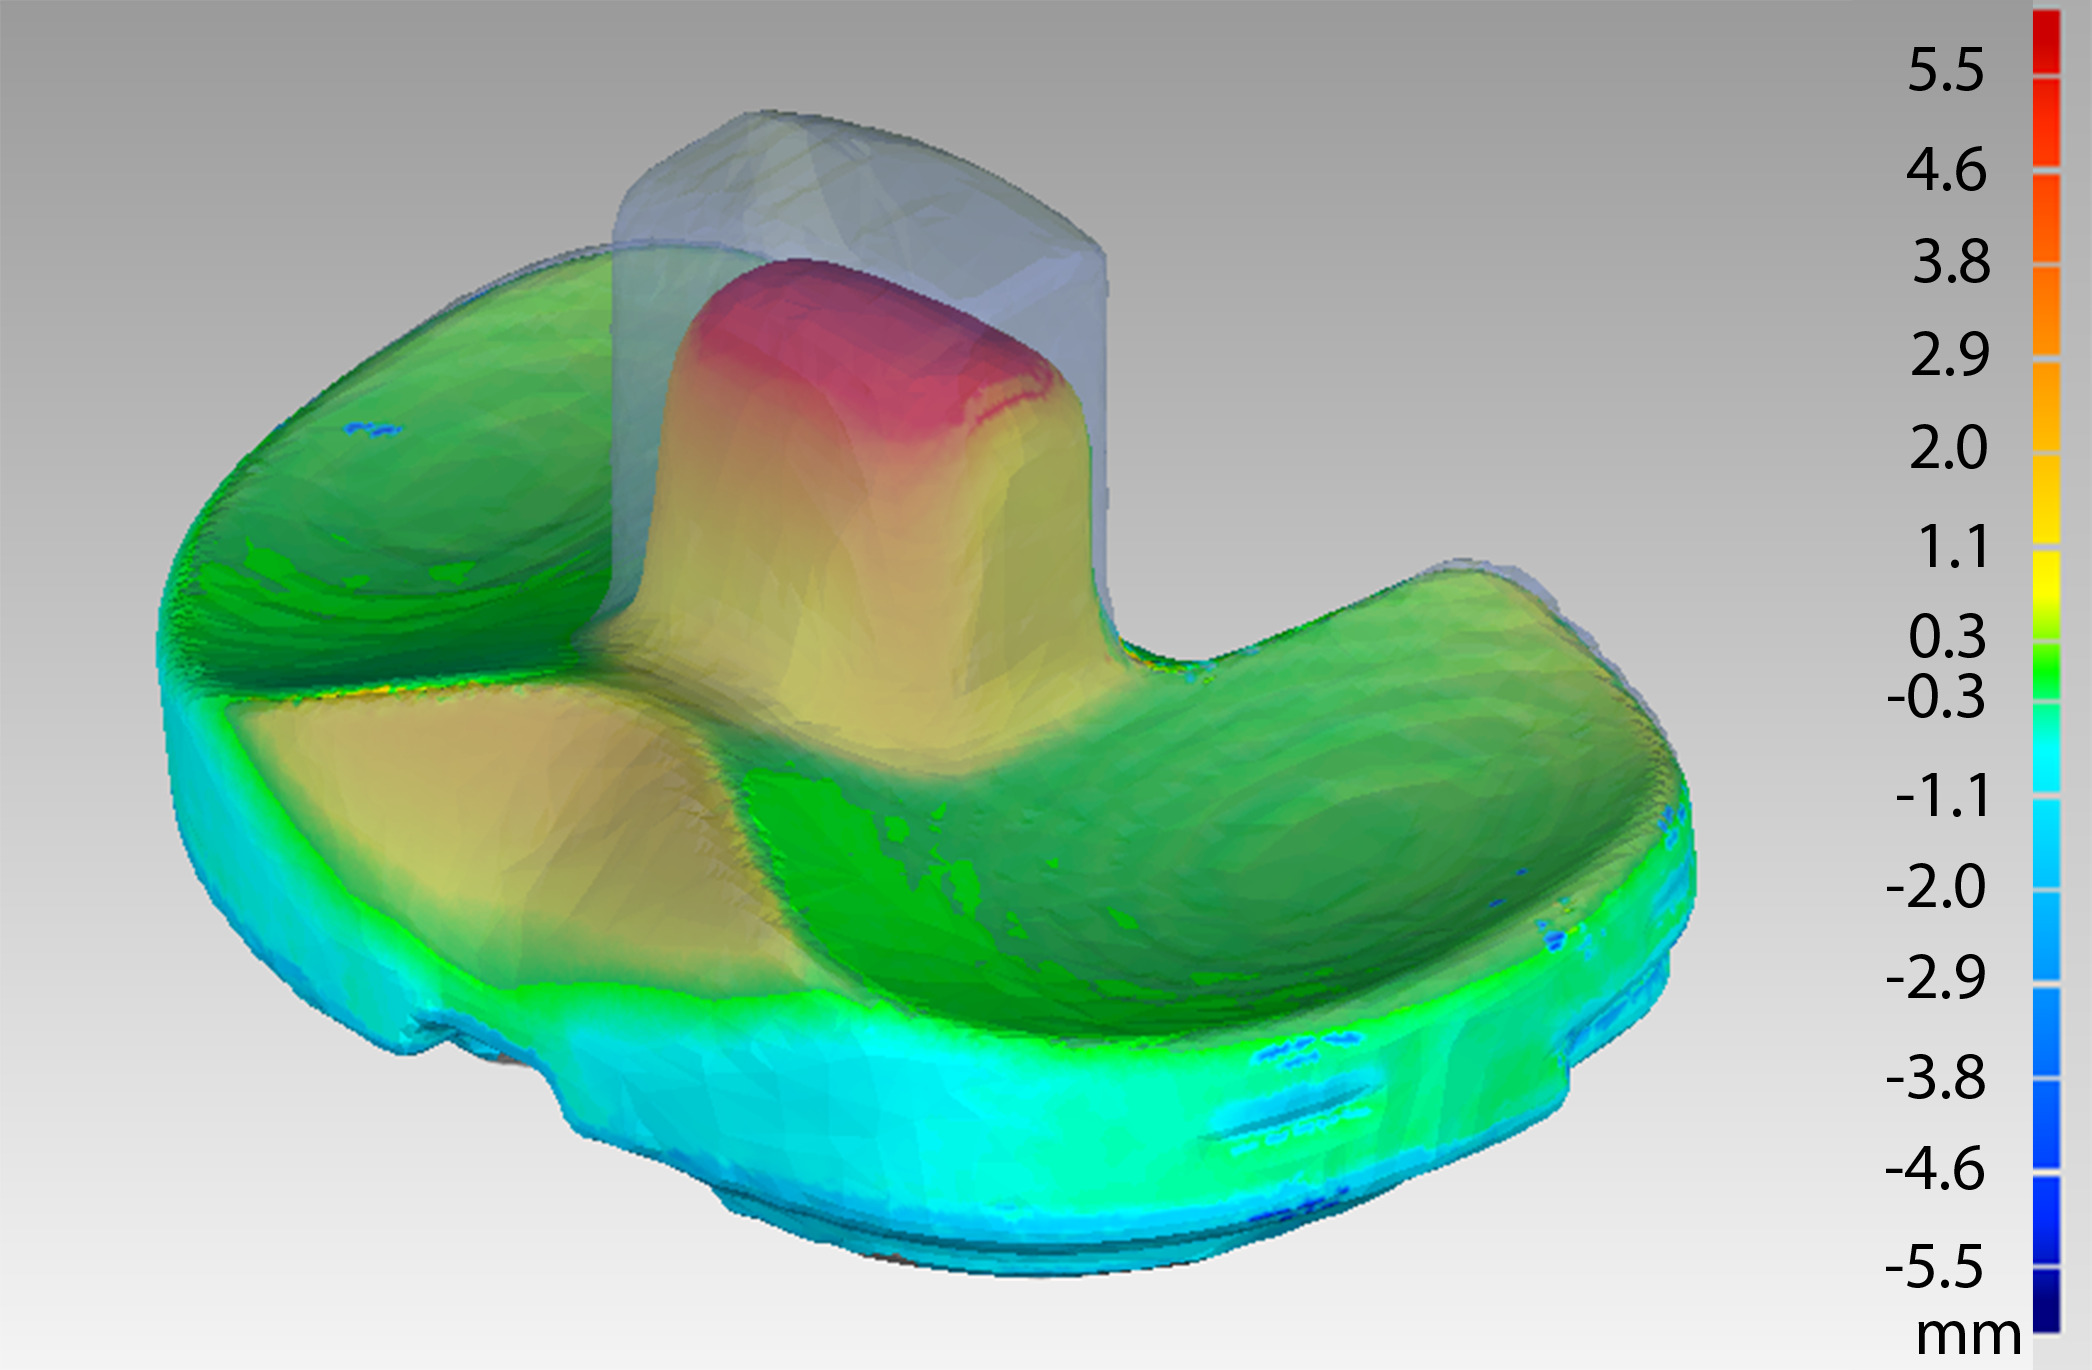 Fig. 1 
            Overlay of 3D scans of the posterior-stabilized insert (multicolored) and mid-level tibial insert (semitransparent) (Persona; Zimmer Biomet, USA). Inserts were imaged via CT (Biograph mCT; Siemens, Germany) and overlayed using 3D shape matching (Geomagic Wrap; 3D Systems, USA). The heat map indicates differences in insert geometries in millimetres. Hotter colors indicate distances and locations where the PS insert geometry is smaller than the mid-level insert geometry. The maximum difference at the articular surface was < 0.1 mm.
          